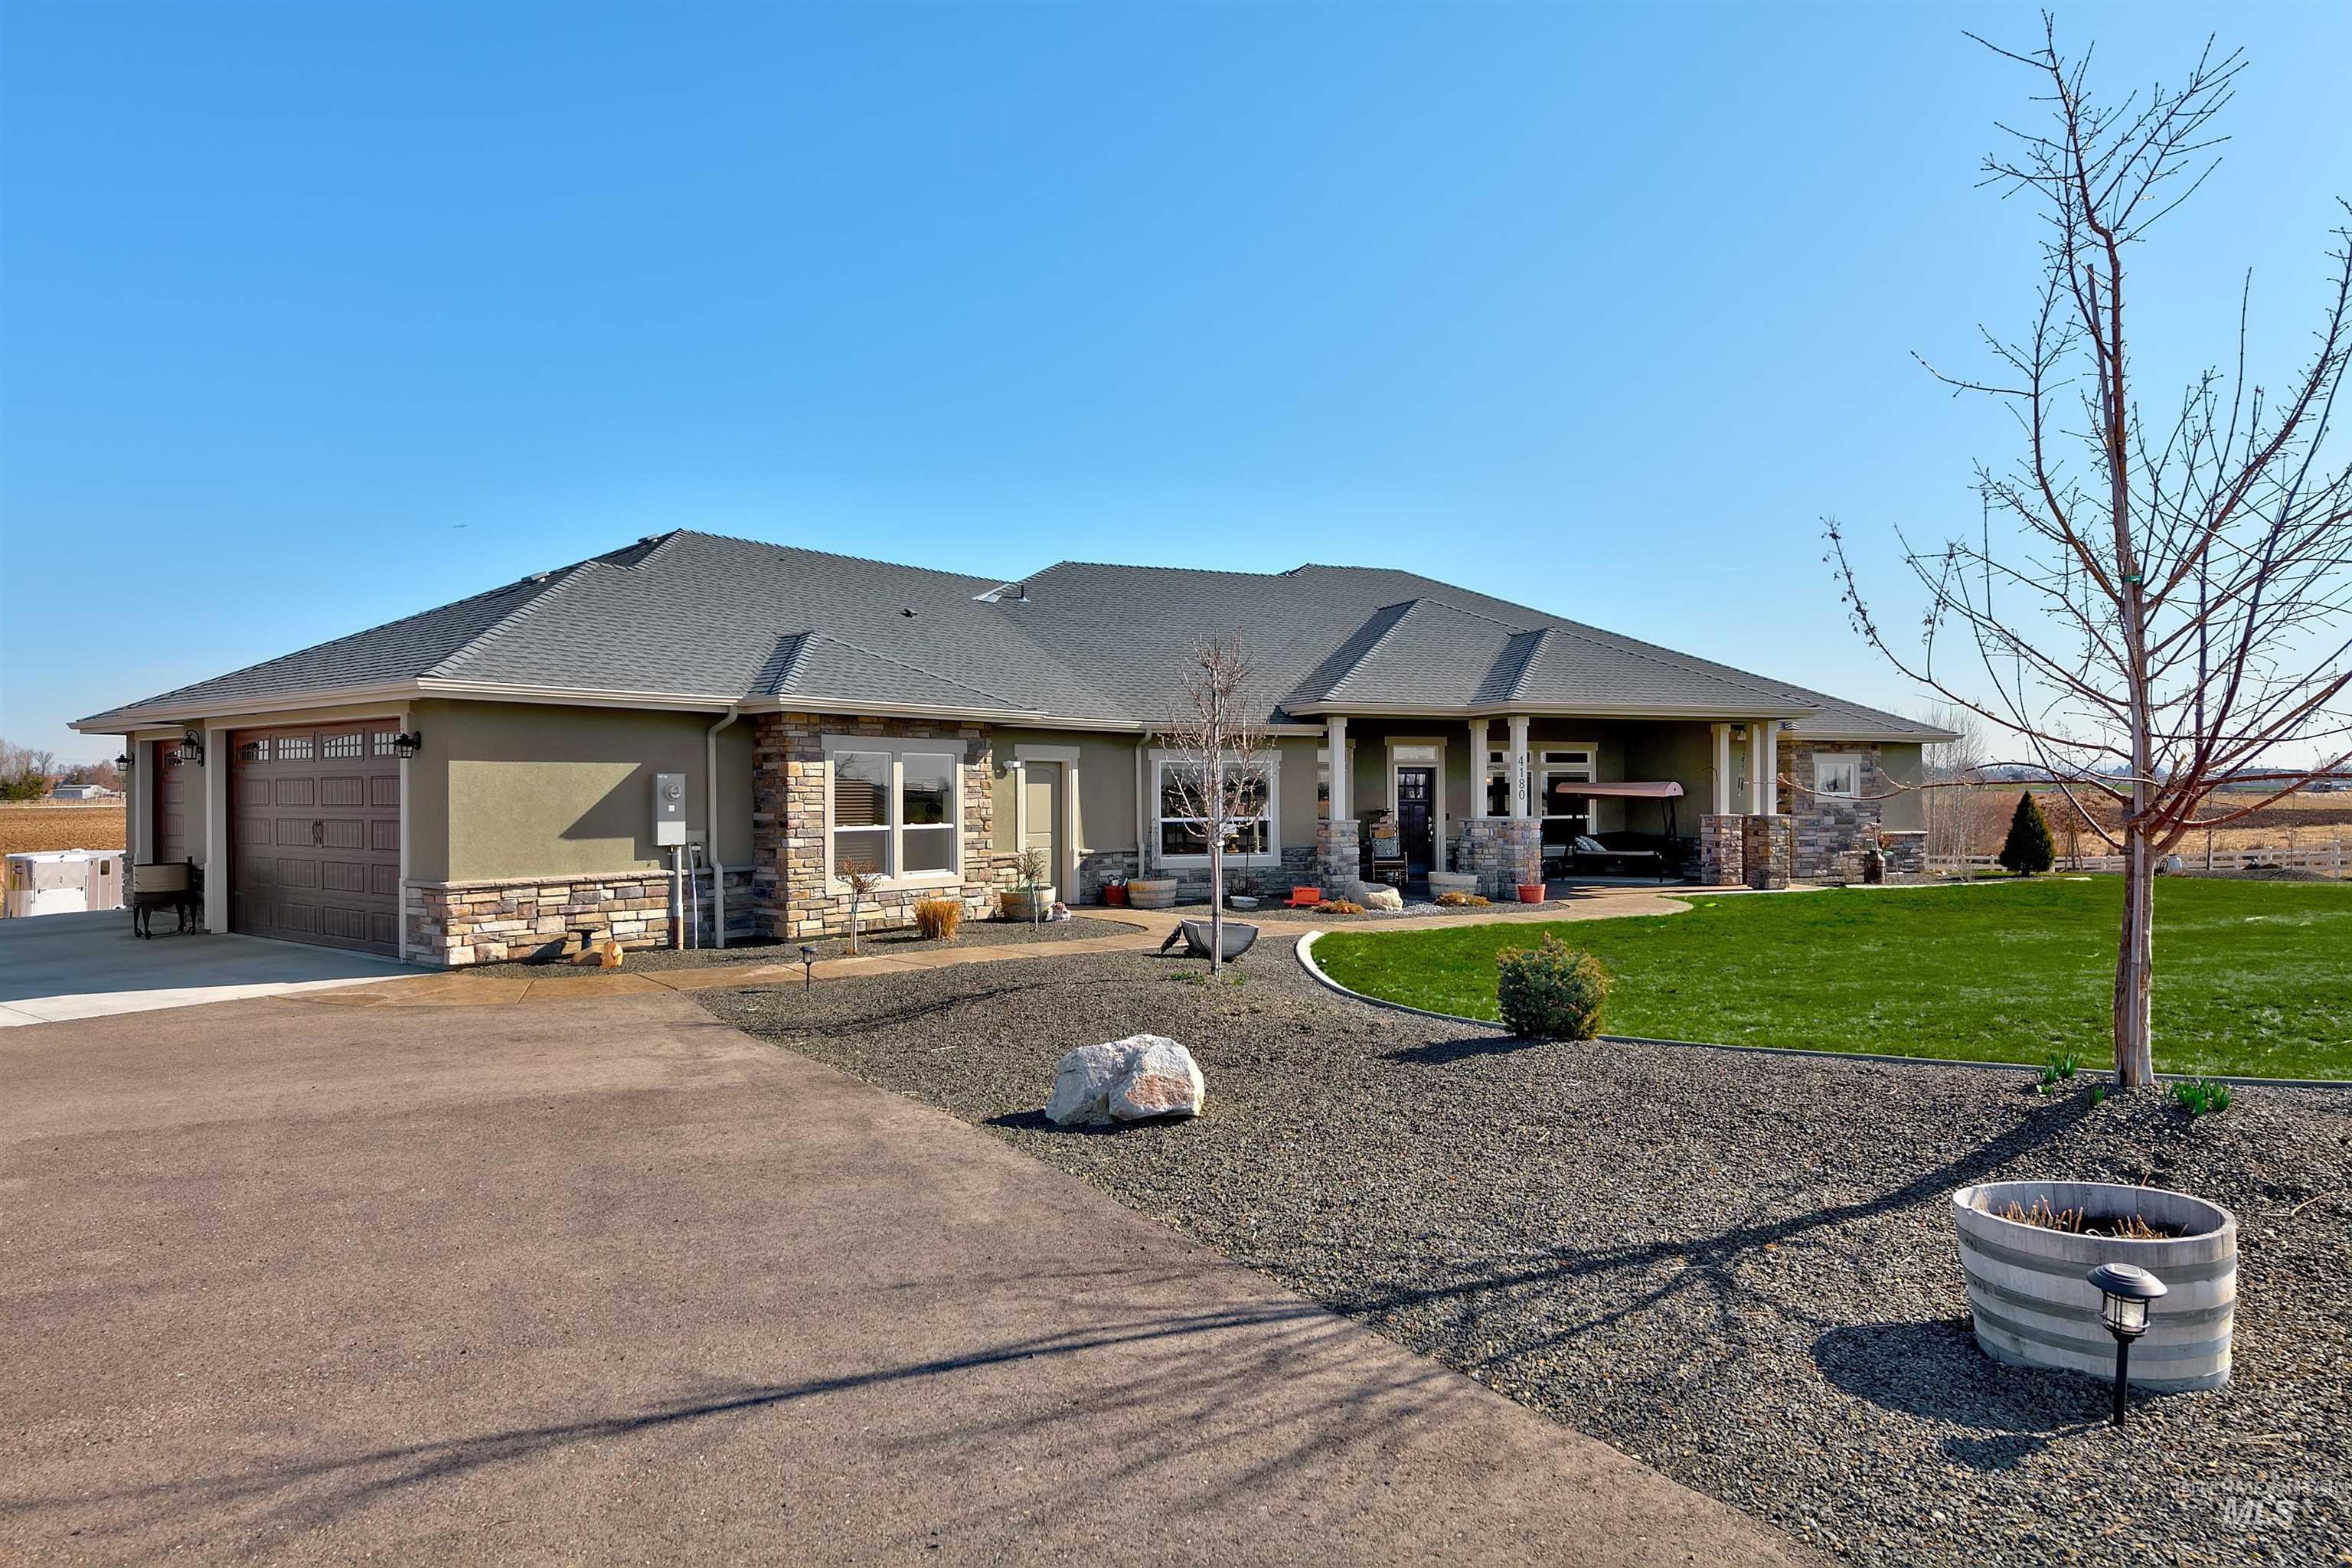 This is a beautiful 4292 sq ft country home in a gated community on 1.85 acres. Enjoy sunrise views of Bogus Basin and sunset views of the Owyhee Mountains. Large master suite, split floorplan, recreational room that has been used as a theatre room with full surround sound, 2 kitchens, & a butler's pantry. Garage has epoxy floors and custom cabinets. Great for outdoor entertaining with lots of room for parking, sand volleyball court, 2 water features, a creek, & shared pond. BTVA - Kamber Johnson, Main: 208-871-6020, FourPointFive Real Estate Boise, LLC, Main: 208-917-3990,